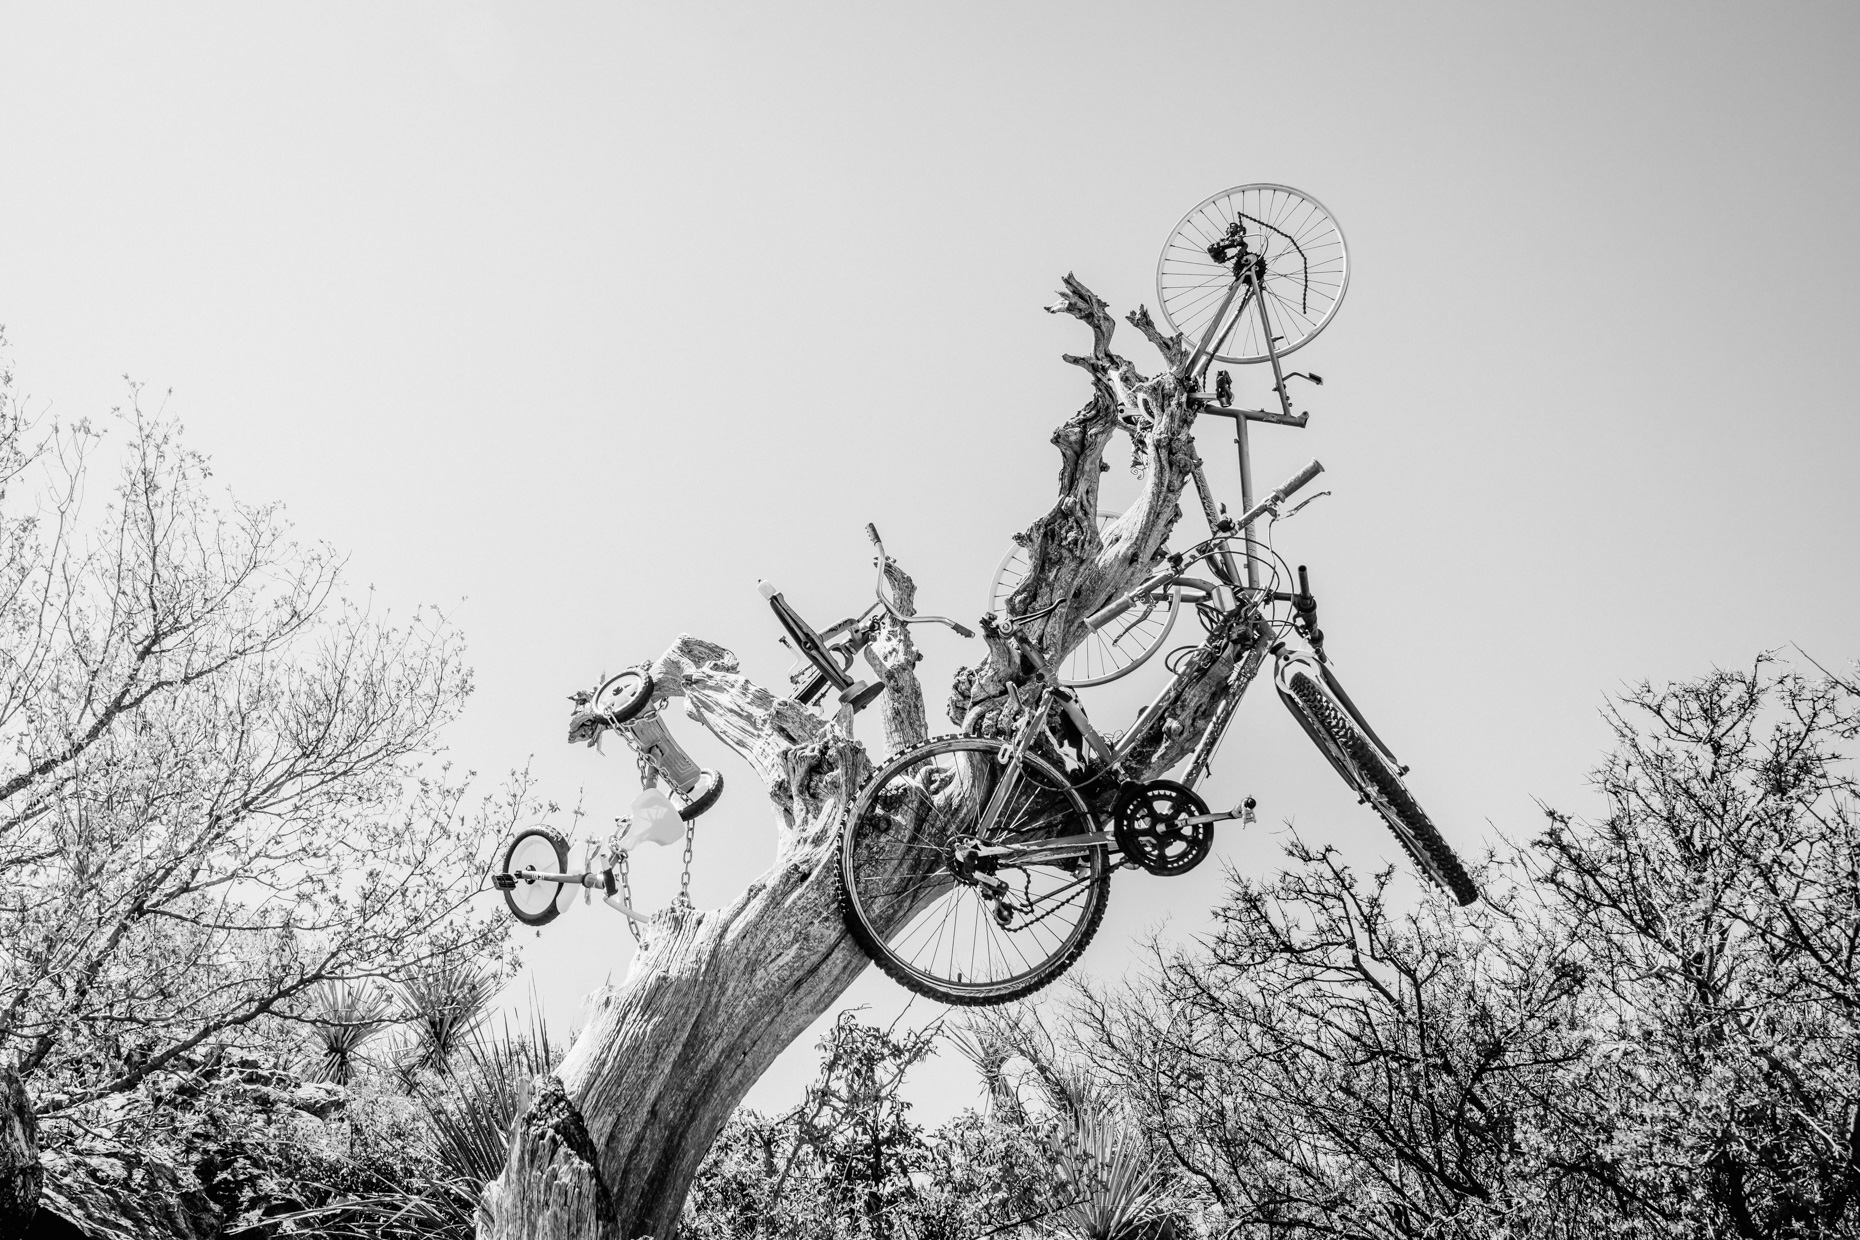 Sculpture of bicycle parts stuck in tree trunk